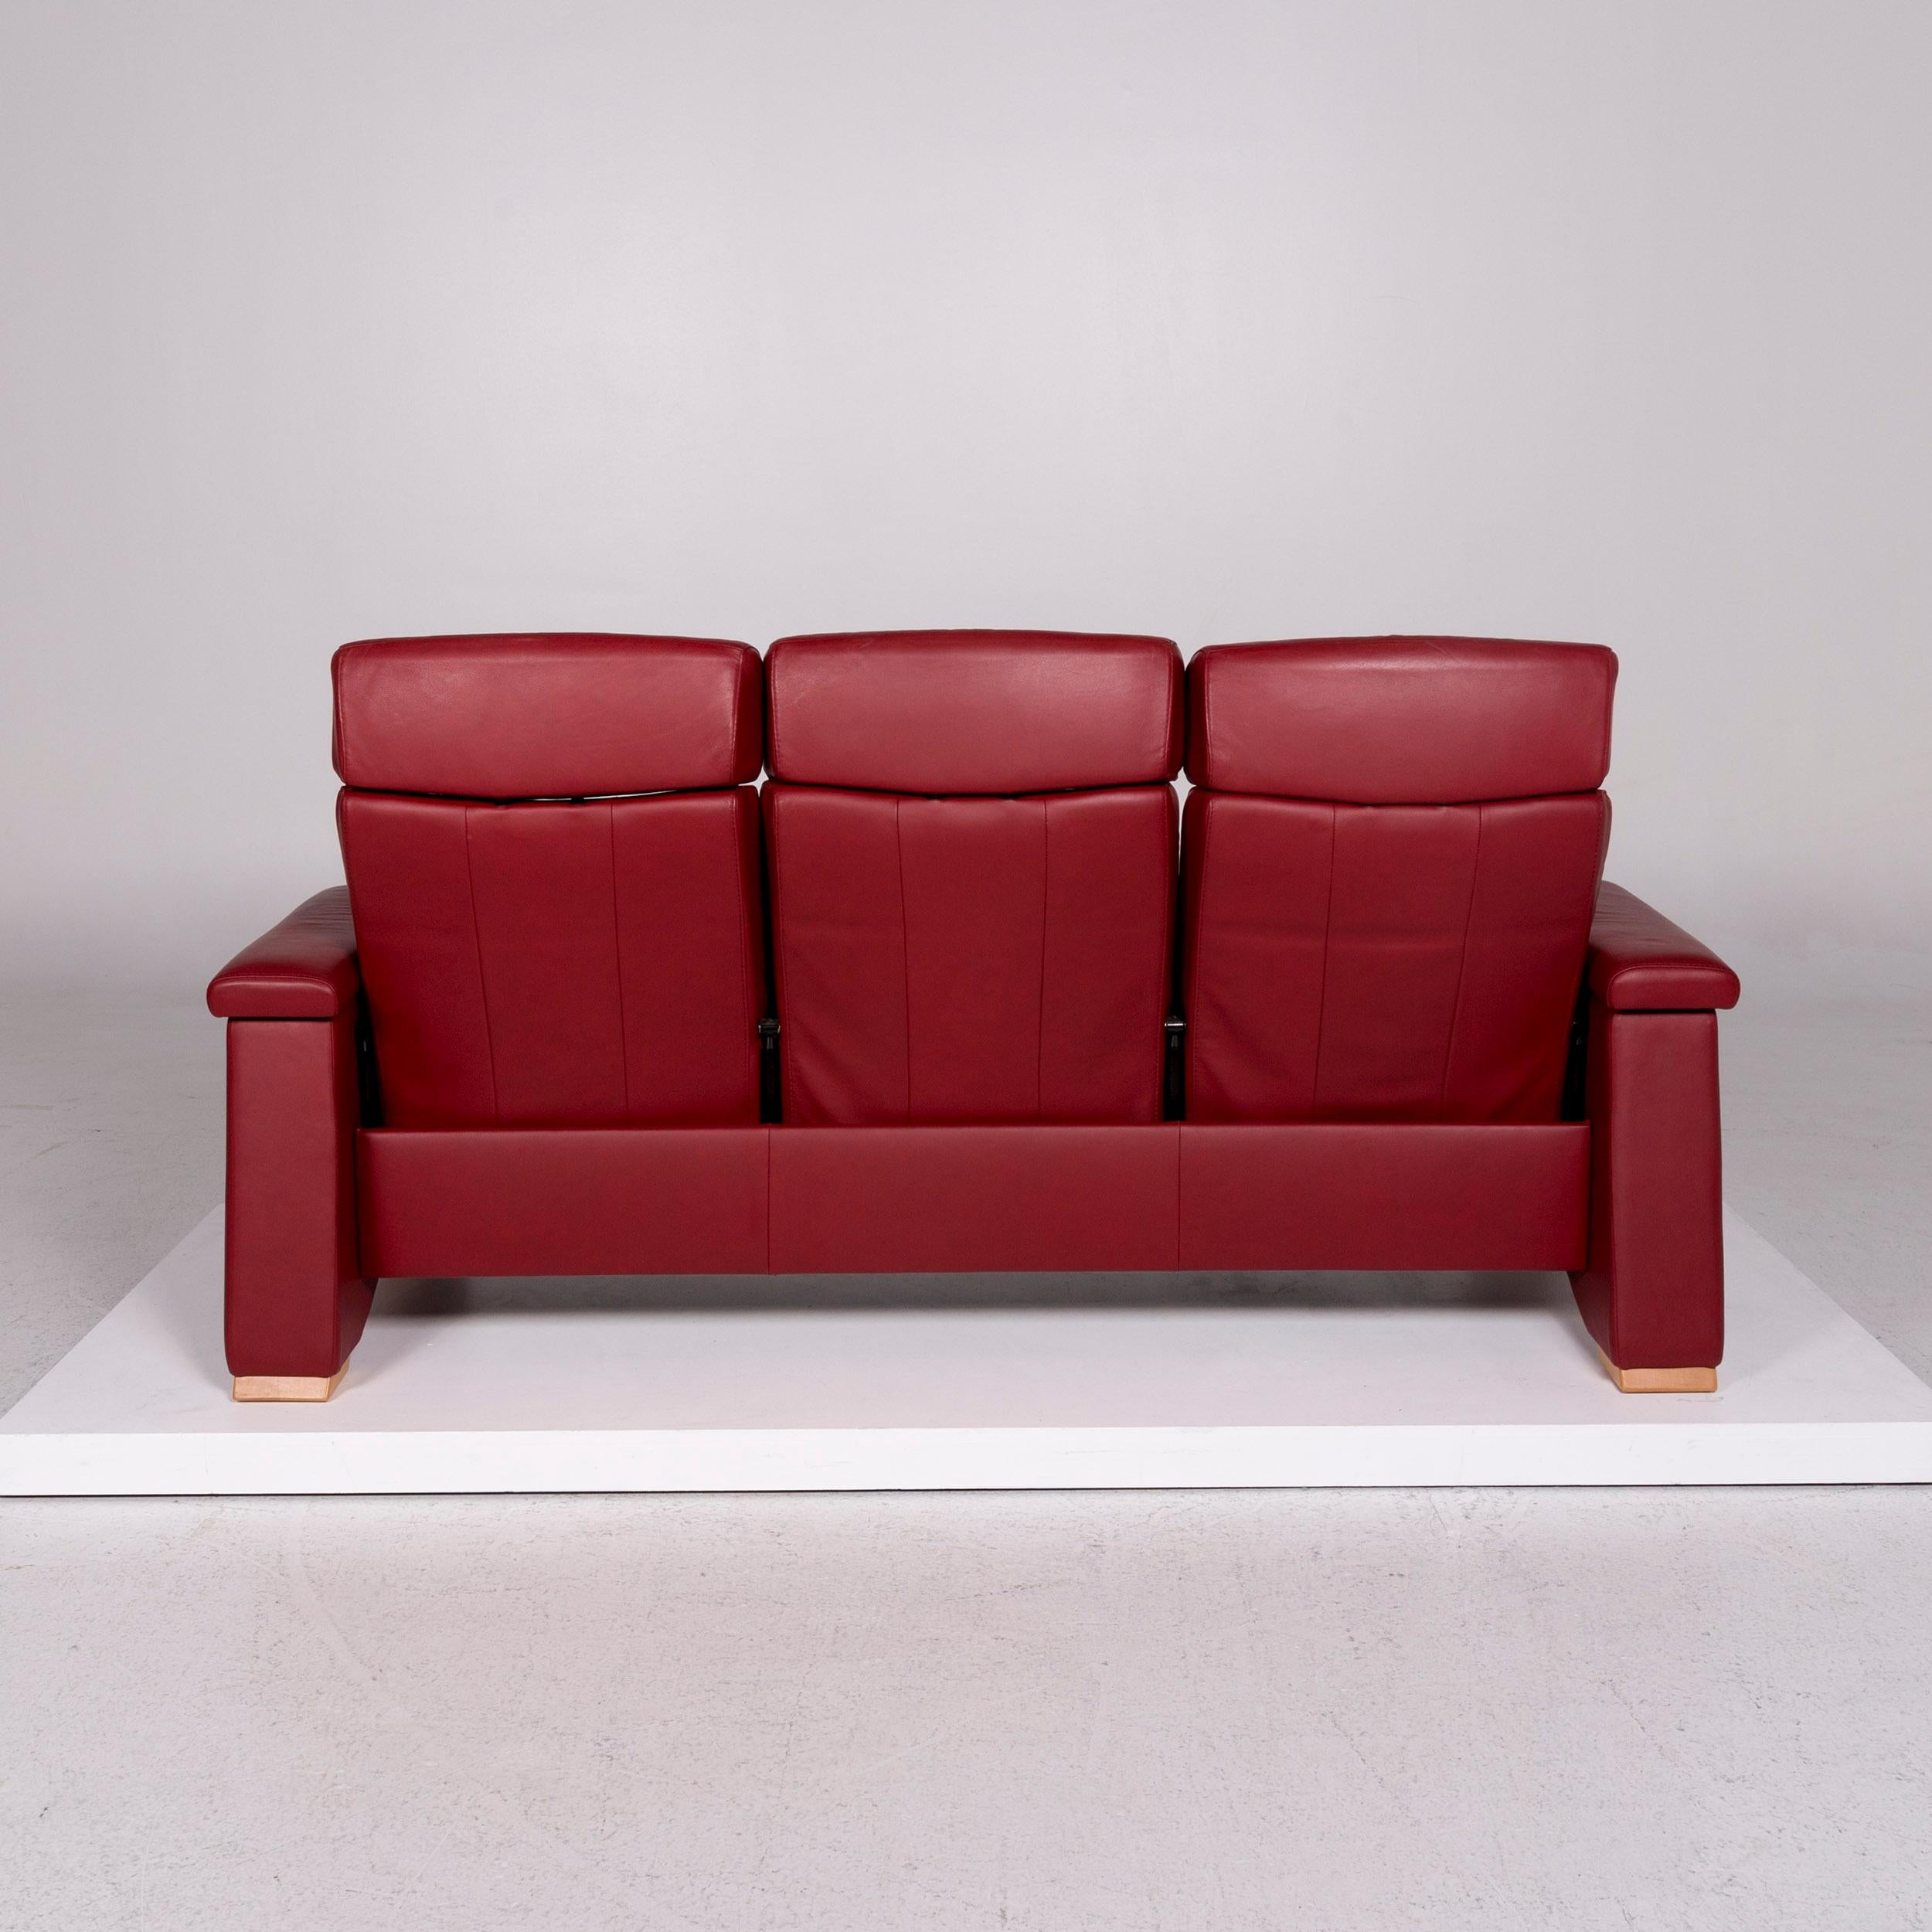 Contemporary Stressless Pegasus Leather Sofa Red Three-Seat Function Couch